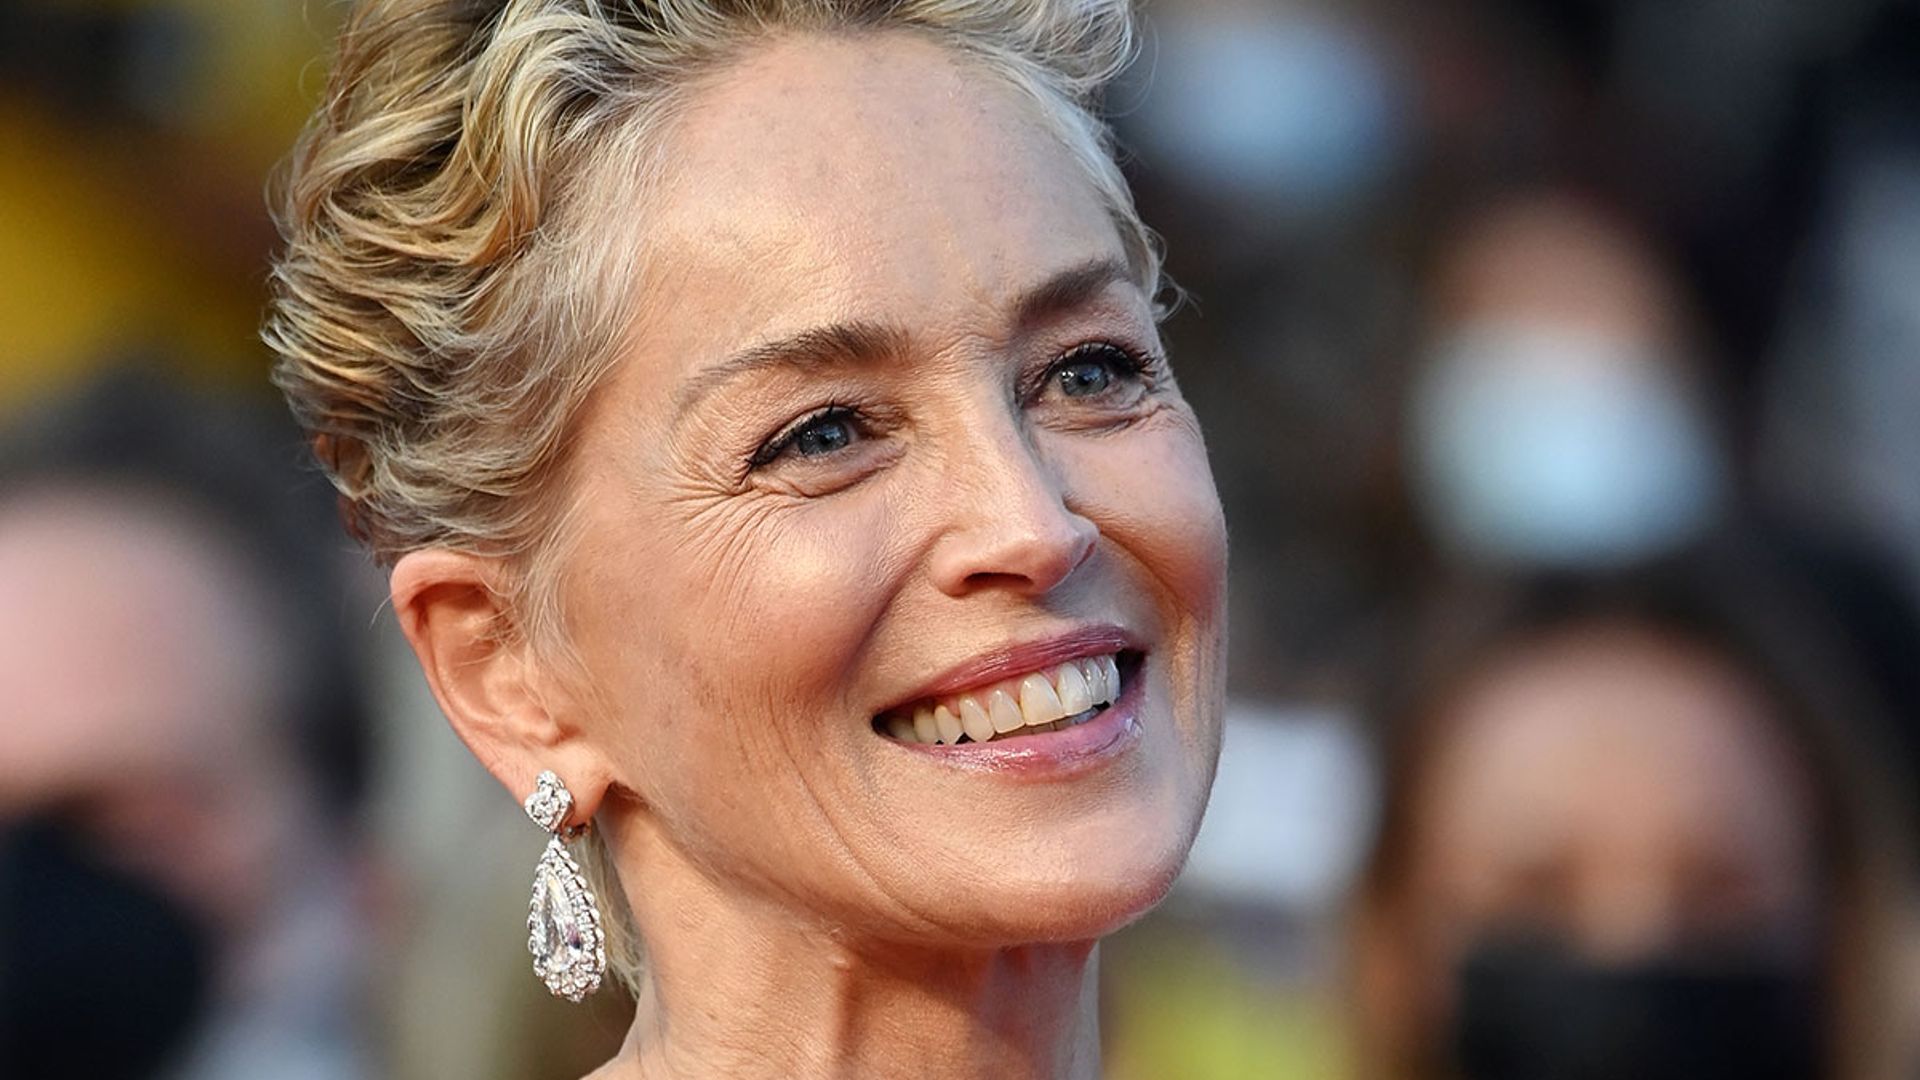 Sharon Stone causes a stir in unexpected beachside outfit